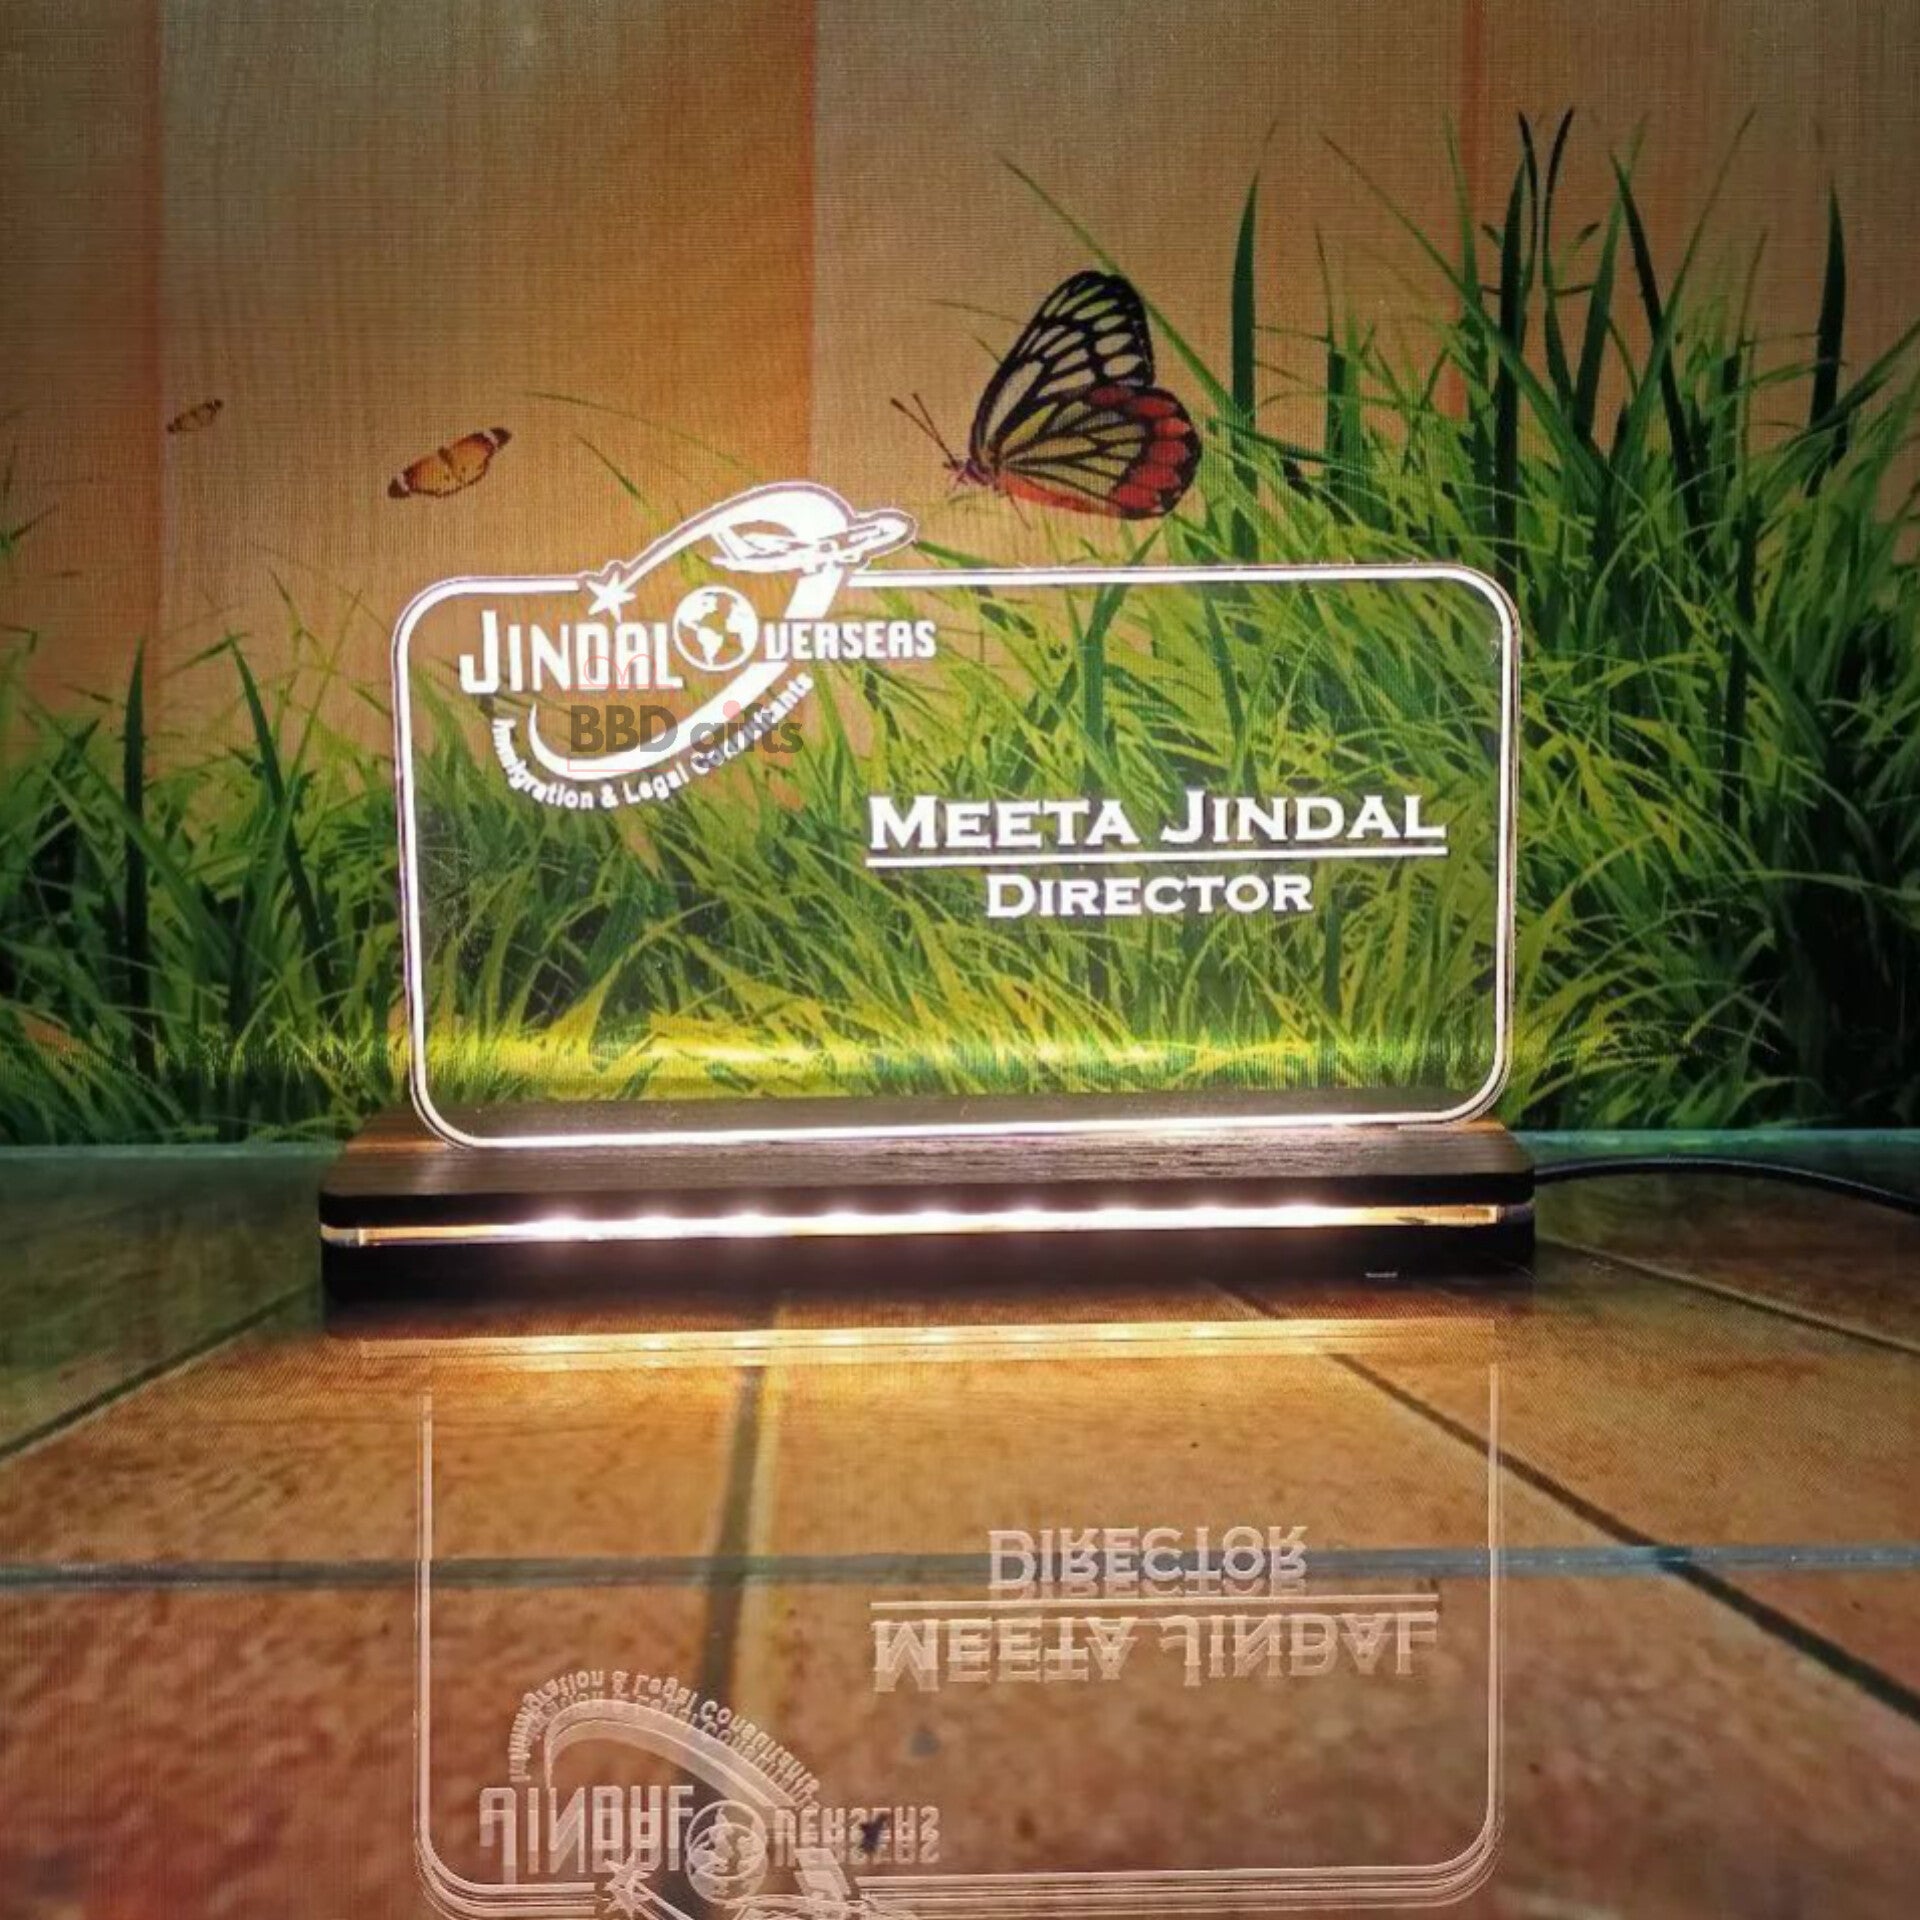 Personalized LED Name Plate For Director | Corporate Gifts | Customized 3DIllusion | Profession Gifts